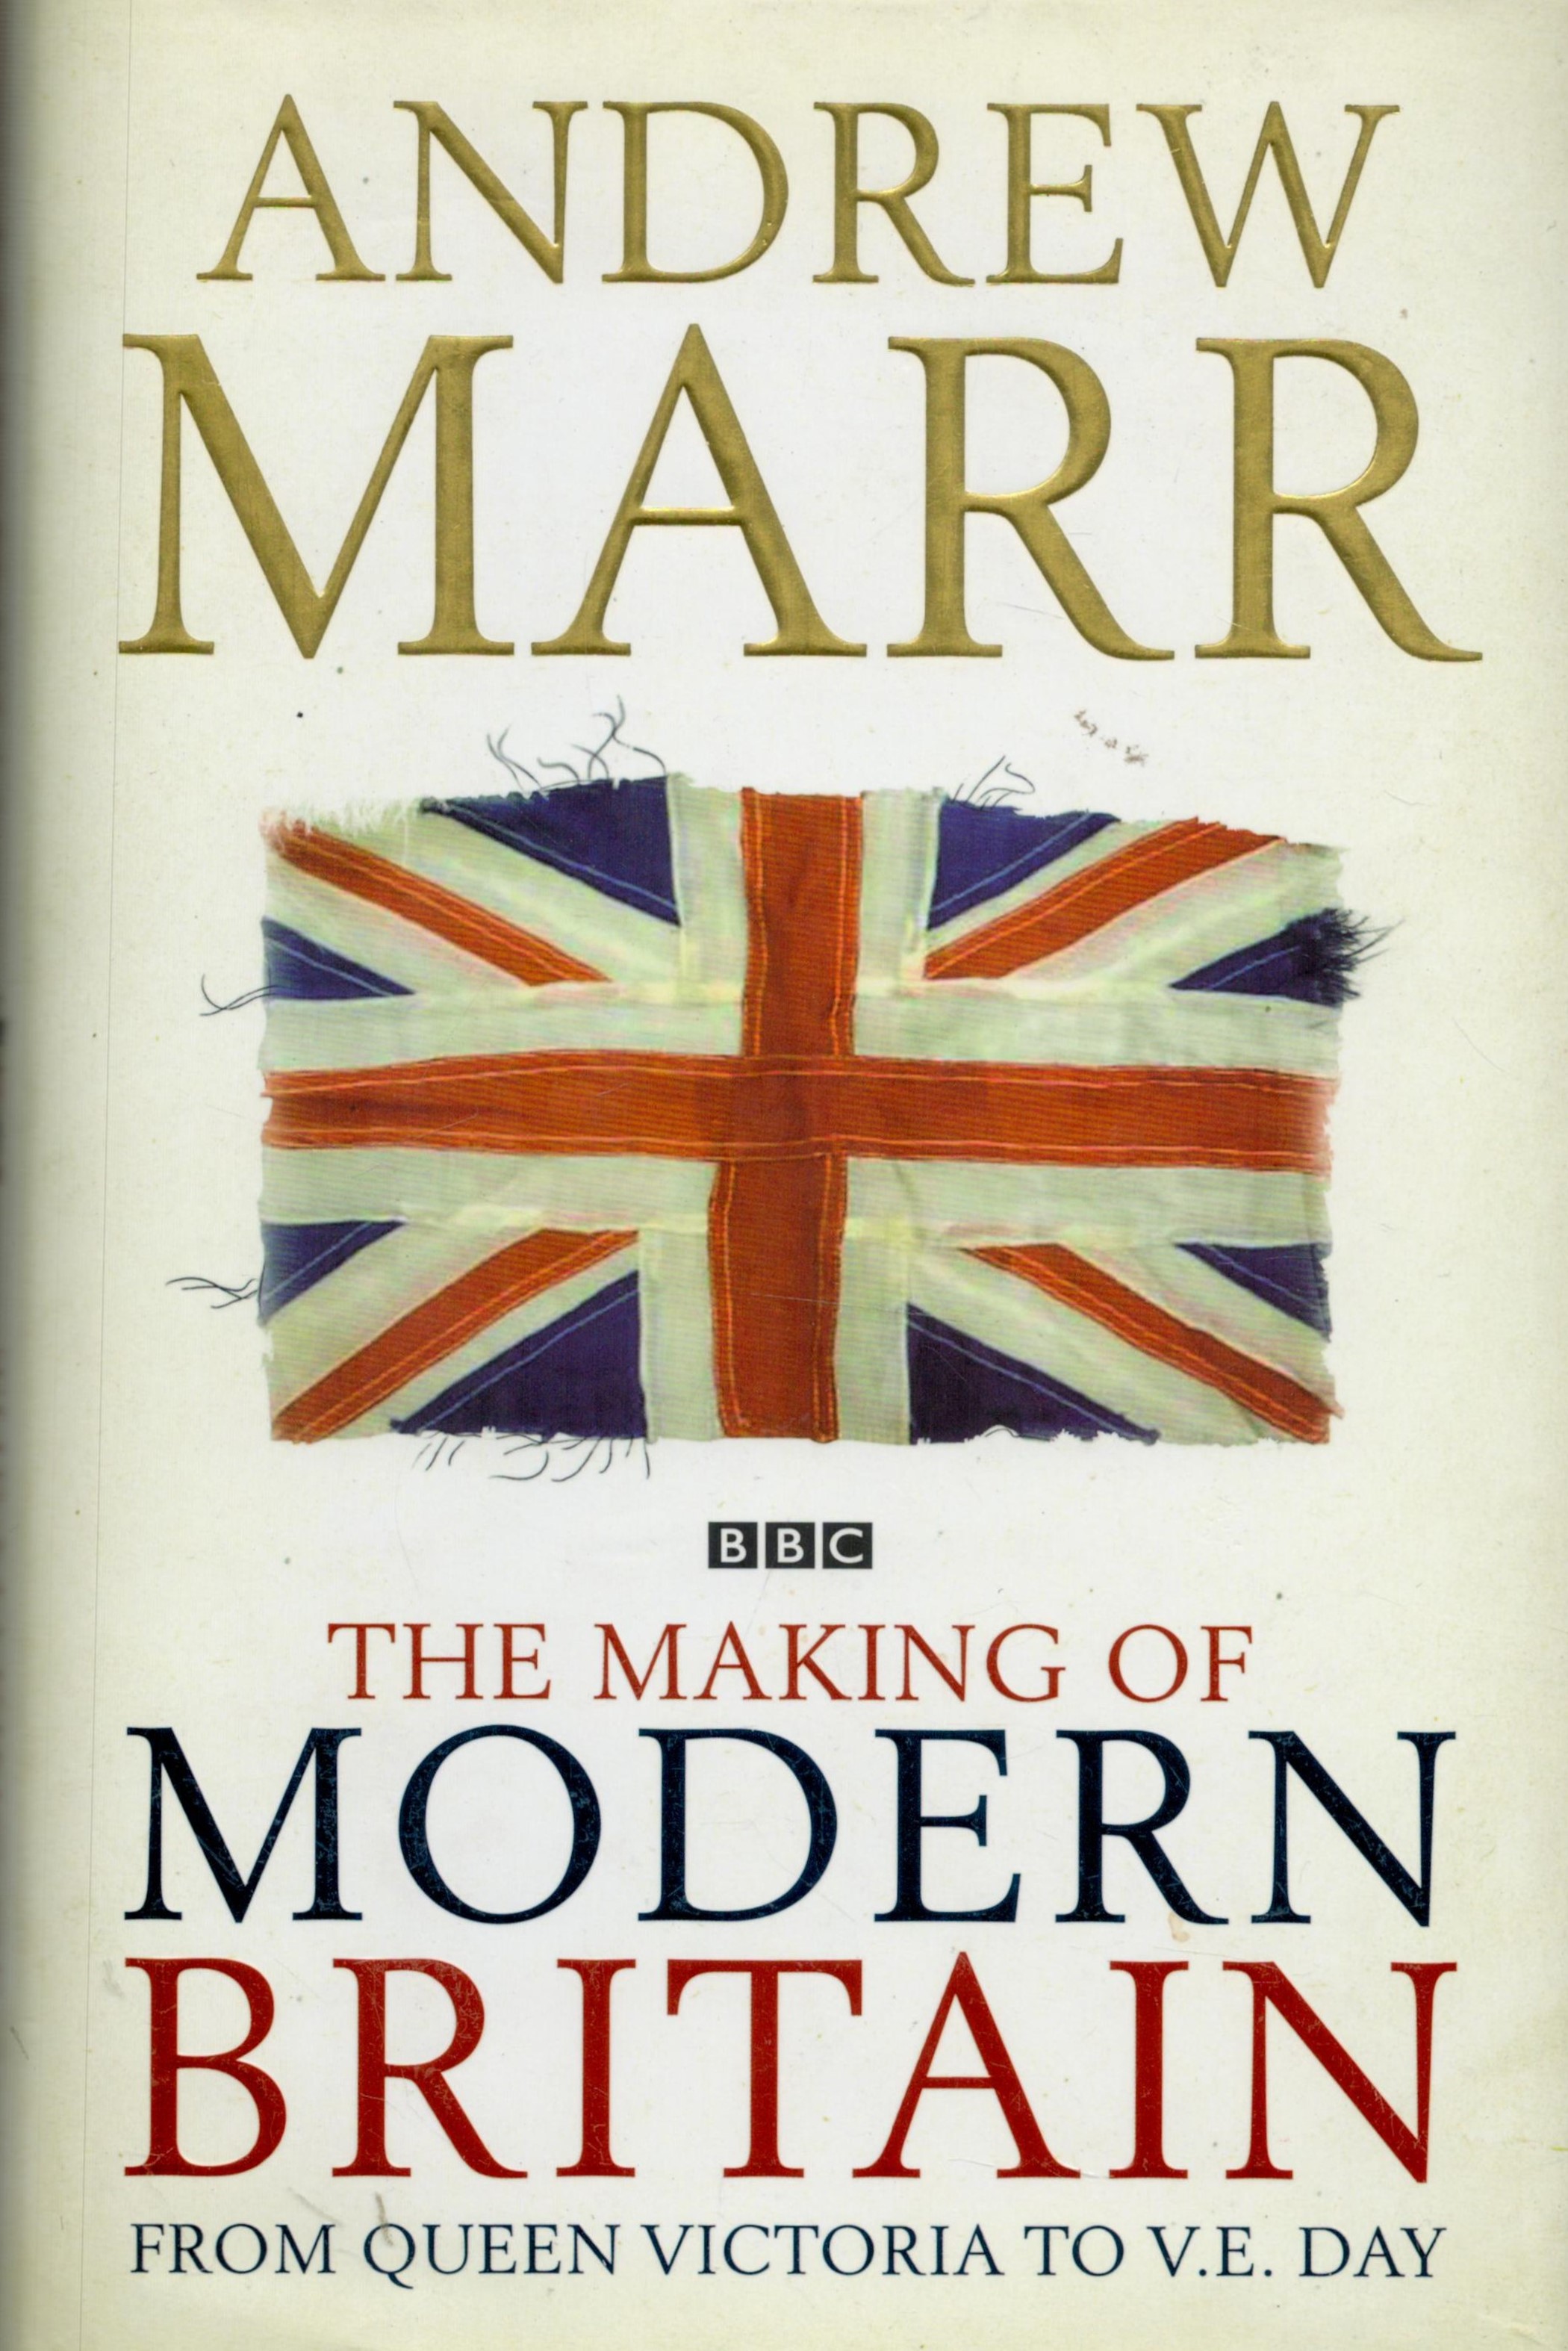 The Making Of Modern Britain by Andrew Marr 2009 First Edition Hardback Book with 451 pages